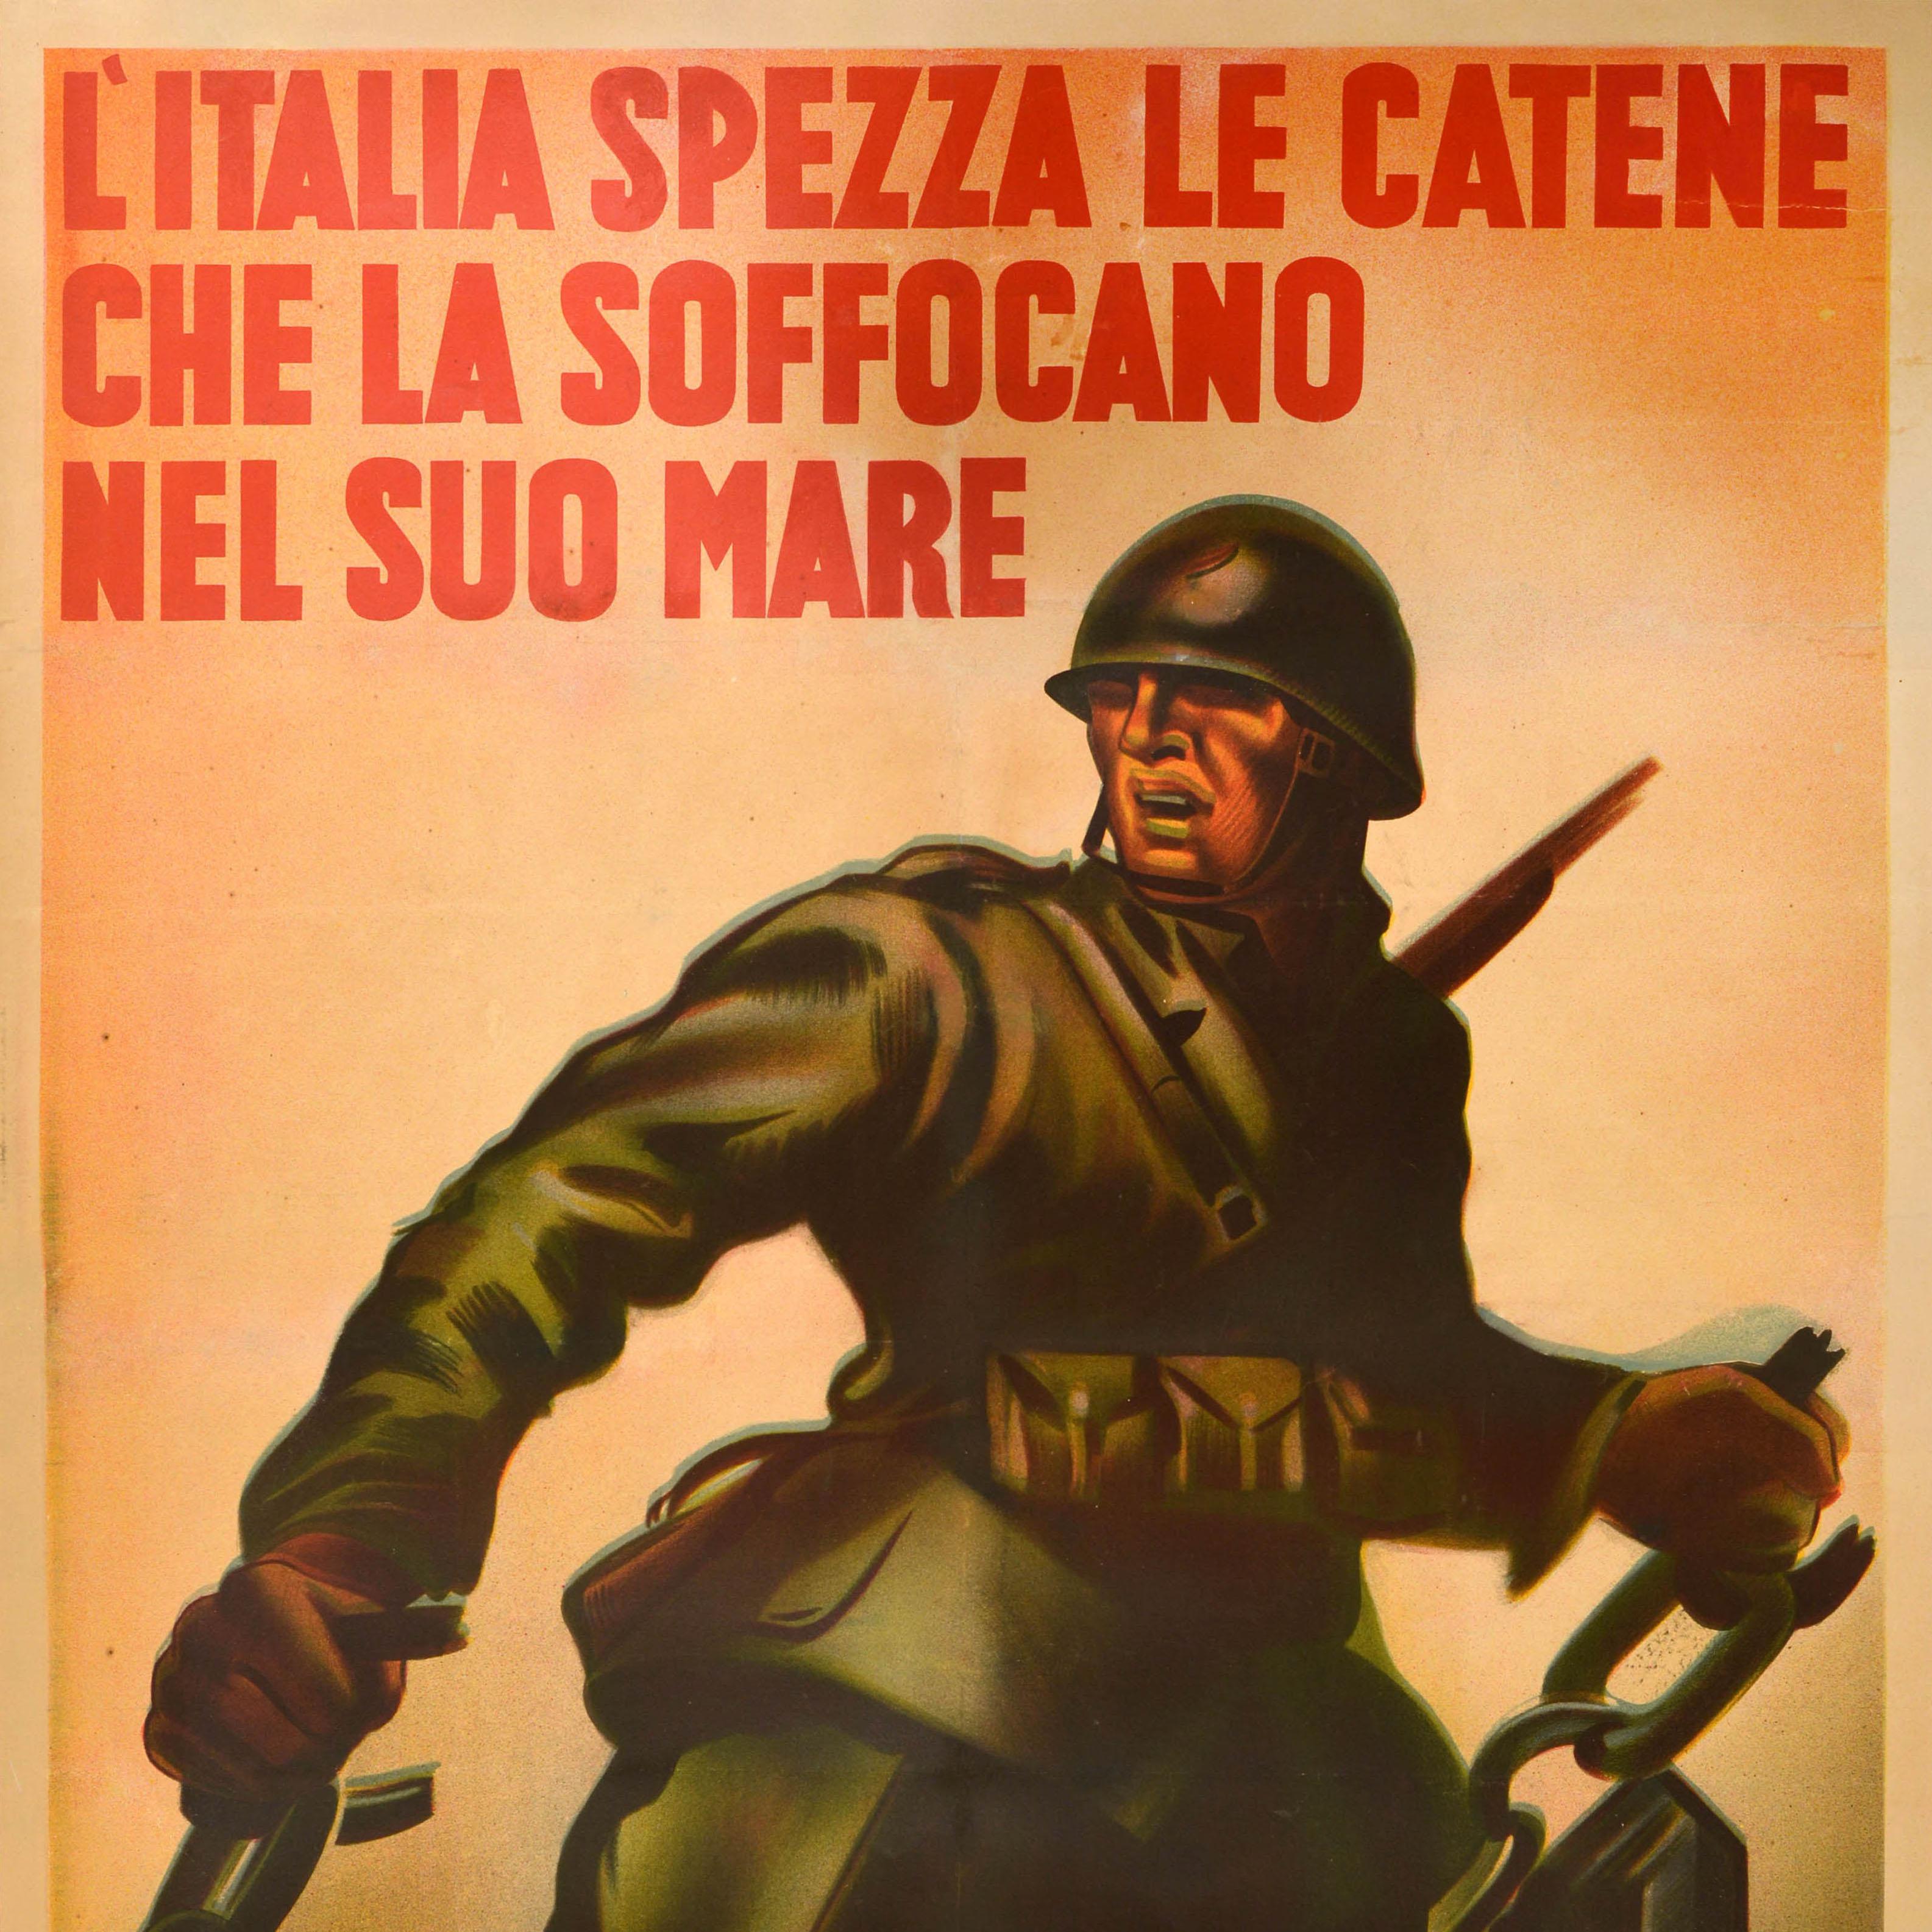 Italian Original Vintage War Poster Italy Breaks Chains That Suffocate Her WWII Soldier For Sale